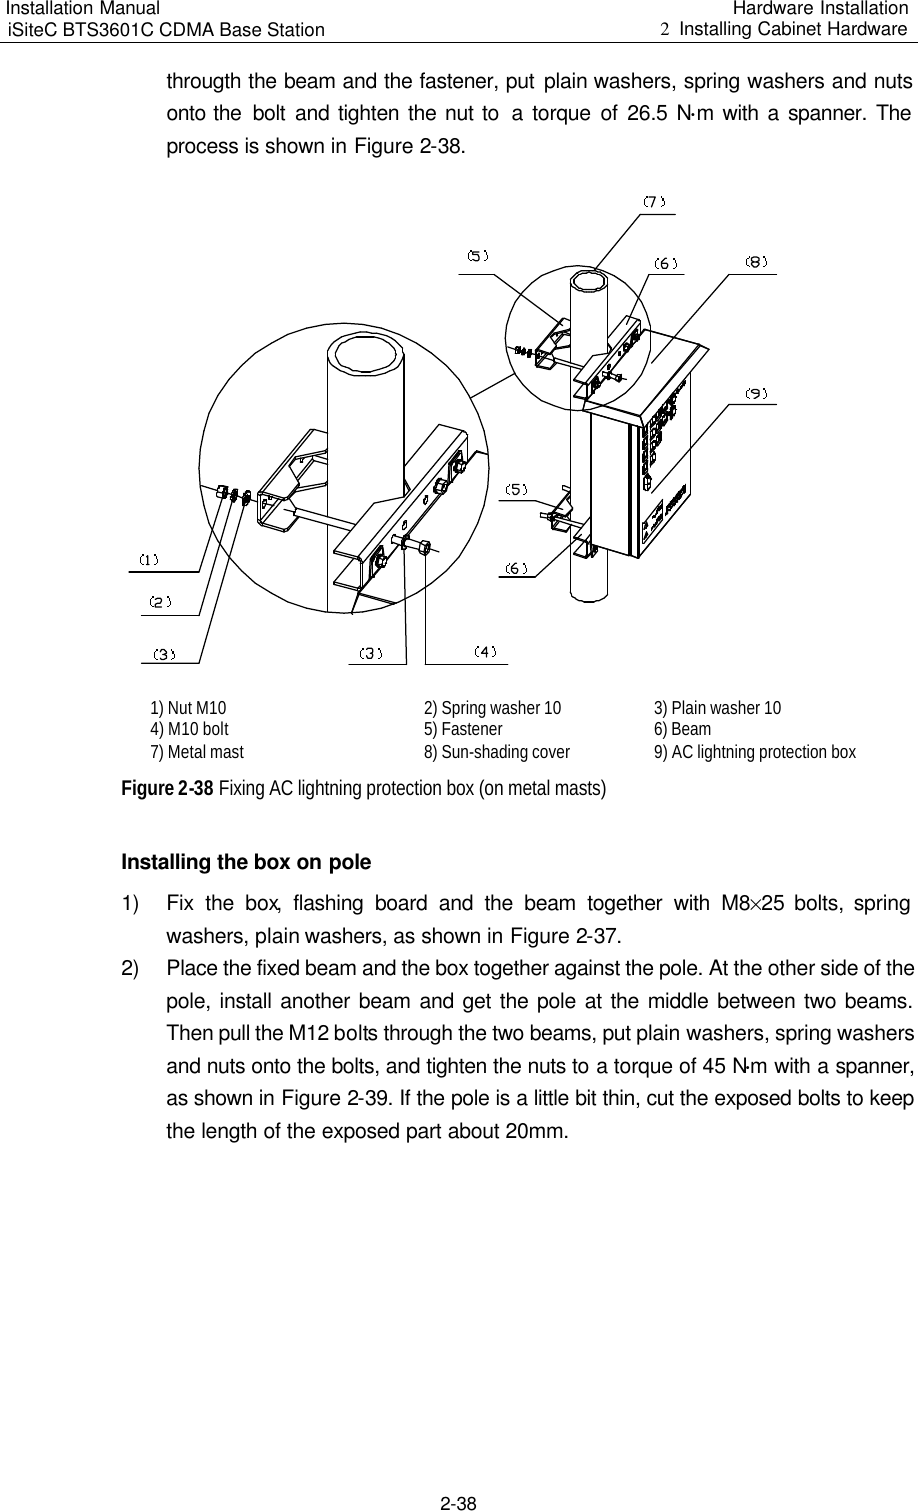 Installation Manual   iSiteC BTS3601C CDMA Base Station Hardware Installation 2  Installing Cabinet Hardware  2-38 througth the beam and the fastener, put plain washers, spring washers and nuts onto the  bolt and tighten the nut to  a torque of 26.5 N$m with a spanner. The process is shown in Figure 2-38.   1) Nut M10  2) Spring washer 10  3) Plain washer 10  4) M10 bolt  5) Fastener  6) Beam  7) Metal mast  8) Sun-shading cover  9) AC lightning protection box  Figure 2-38 Fixing AC lightning protection box (on metal masts) Installing the box on pole 1) Fix the box, flashing board and the beam together with M8%25 bolts, spring washers, plain washers, as shown in Figure 2-37. 2) Place the fixed beam and the box together against the pole. At the other side of the pole, install another beam and get the pole at the middle between two beams. Then pull the M12 bolts through the two beams, put plain washers, spring washers and nuts onto the bolts, and tighten the nuts to a torque of 45 N$m with a spanner, as shown in Figure 2-39. If the pole is a little bit thin, cut the exposed bolts to keep the length of the exposed part about 20mm.  